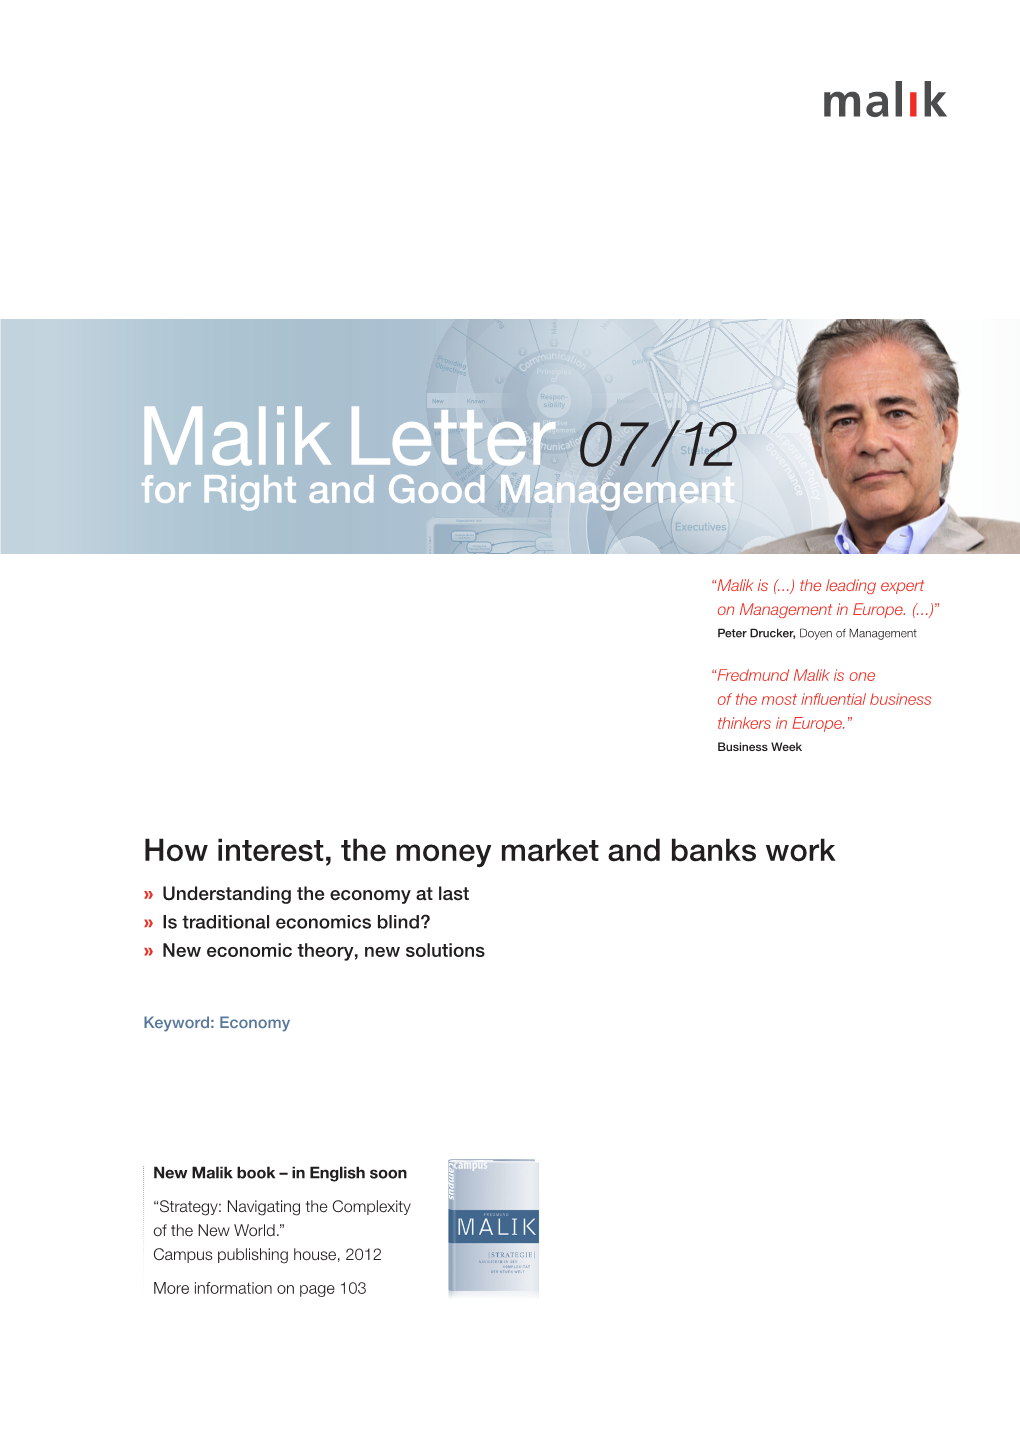 Malik Letter Is Protected by Copyright